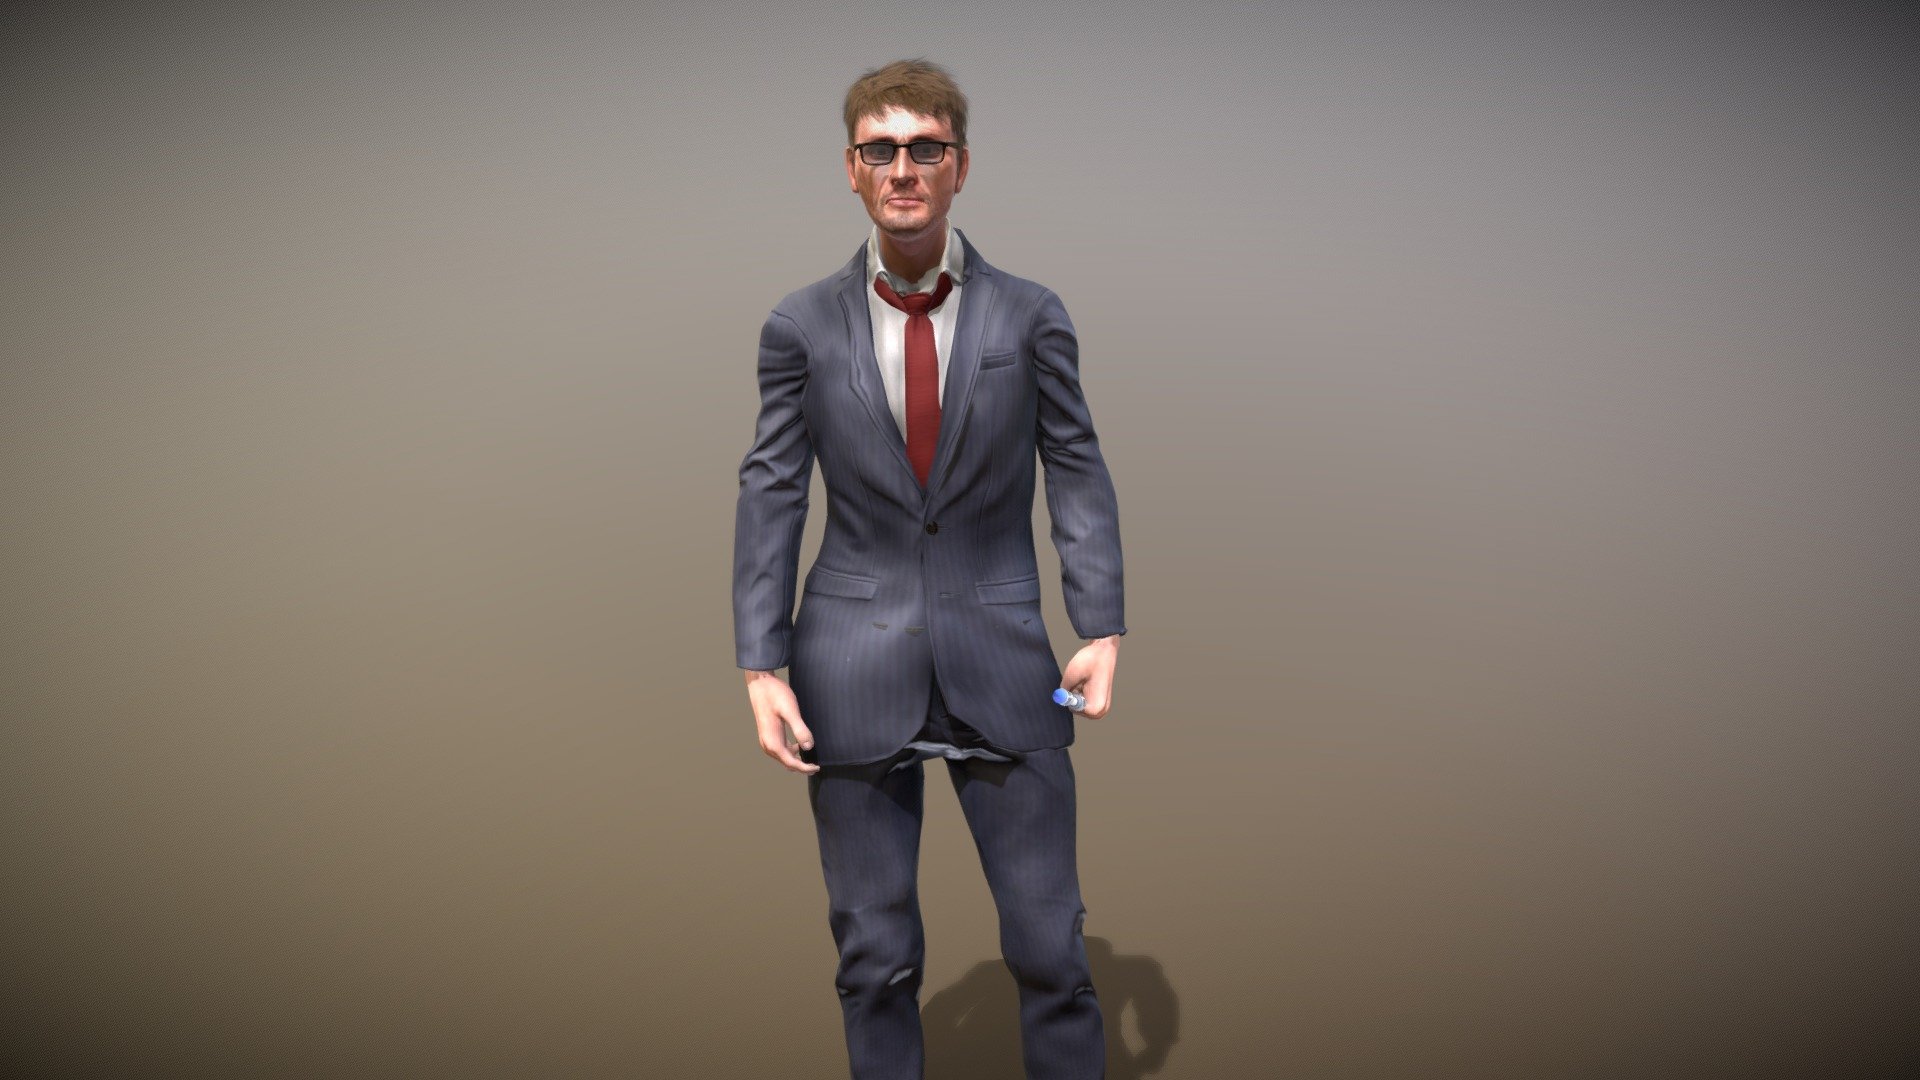 10th Doctor Who - David Tennant

Made with:
Google Pictures of David Tennant
CrazyTalk8
Character Creator 3
IClone7
Autodesk Maya

Model by: Spaehling

Website: https://www.grip420.com/

Discord: Follow us on Discord

Facebook Follow us on Facebook - 10th Doctor Who - David Tennant - 3D model by GRIP420 3d model